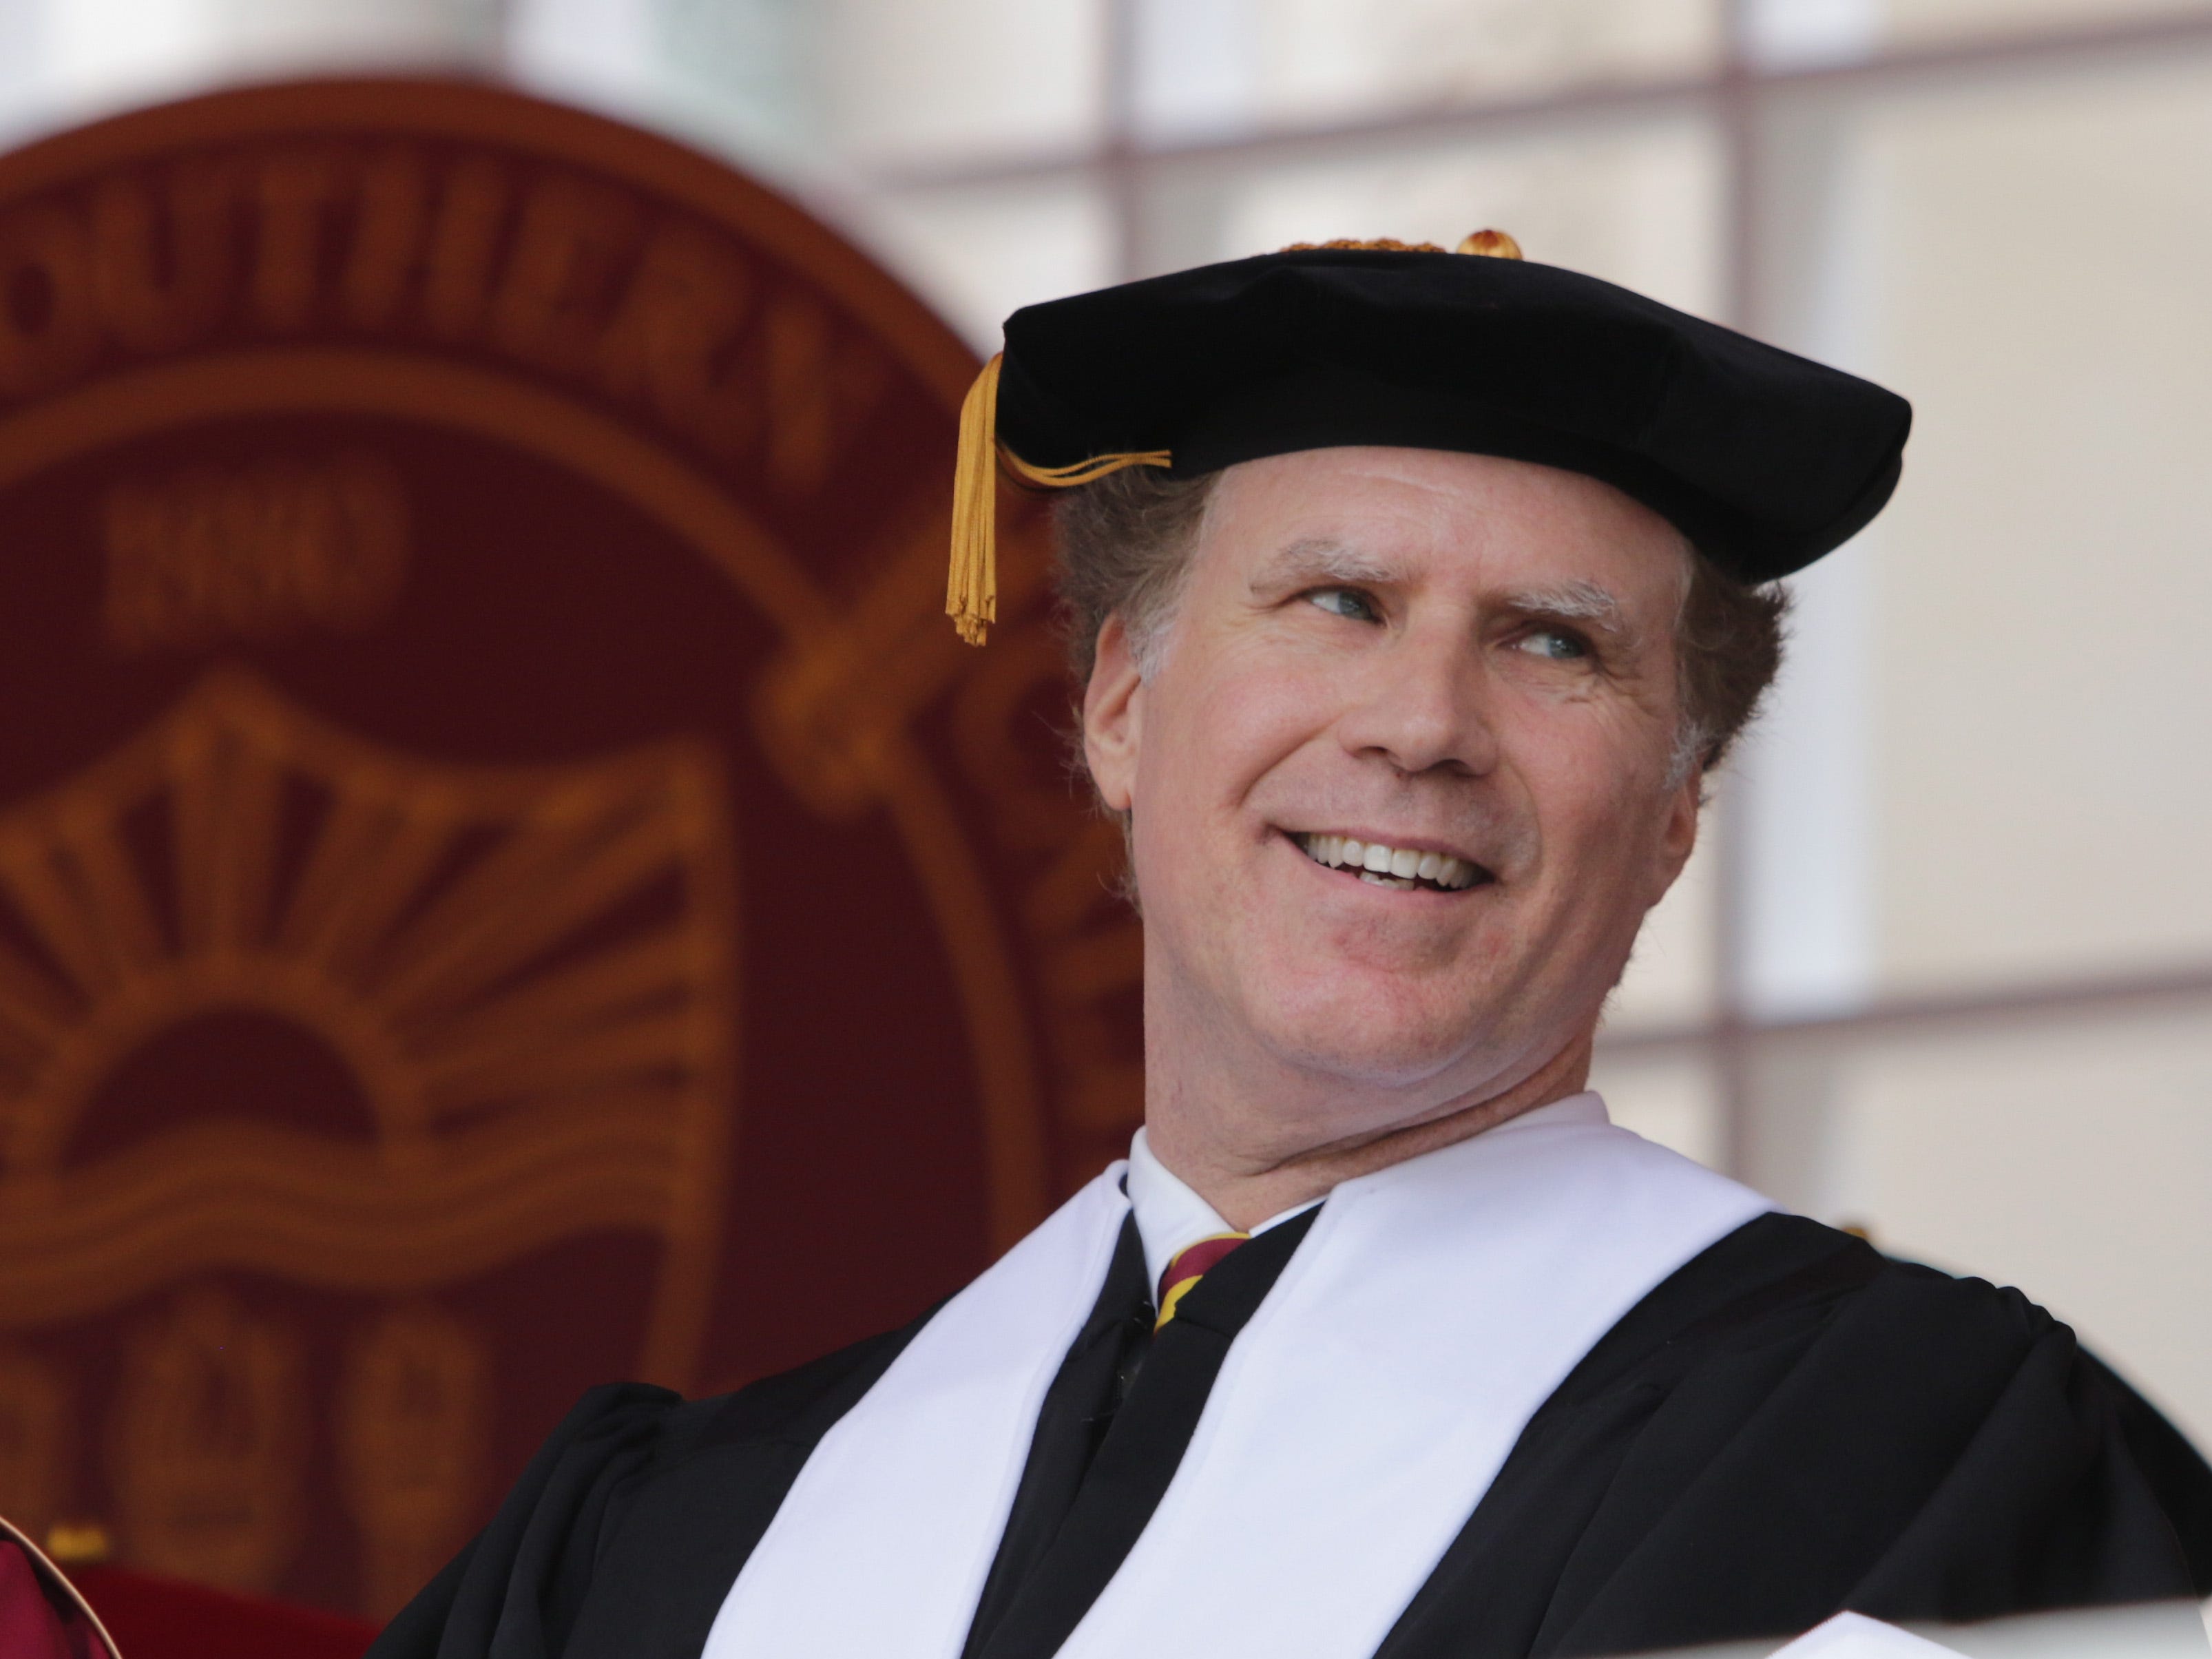 <p>Comedian Will Ferrell, best known for lead roles in films like "Anchorman," "Elf," and "Talledega Nights," delivered a thoughtful speech to USC's graduating class of 2018.</p><p>"No matter how cliché it may sound, you will never truly be successful until you learn to give beyond yourself," he said. "Empathy and kindness are the true signs of emotional intelligence, and that's what Viv and I try to teach our boys. Hey Matthias, get your hands of Axel right now! Stop it. I can see you. OK? Dr. Ferrell's watching you."</p><p>He also offered some words of encouragement: "For many of you who maybe don't have it all figured out, it's OK. That's the same chair that I sat in. Enjoy the process of your search without succumbing to the pressure of the result."</p><p>He even finished off with a stirring rendition of the Whitney Houston classic, "I Will Always Love You." He was, of course, referring to the graduates.</p>